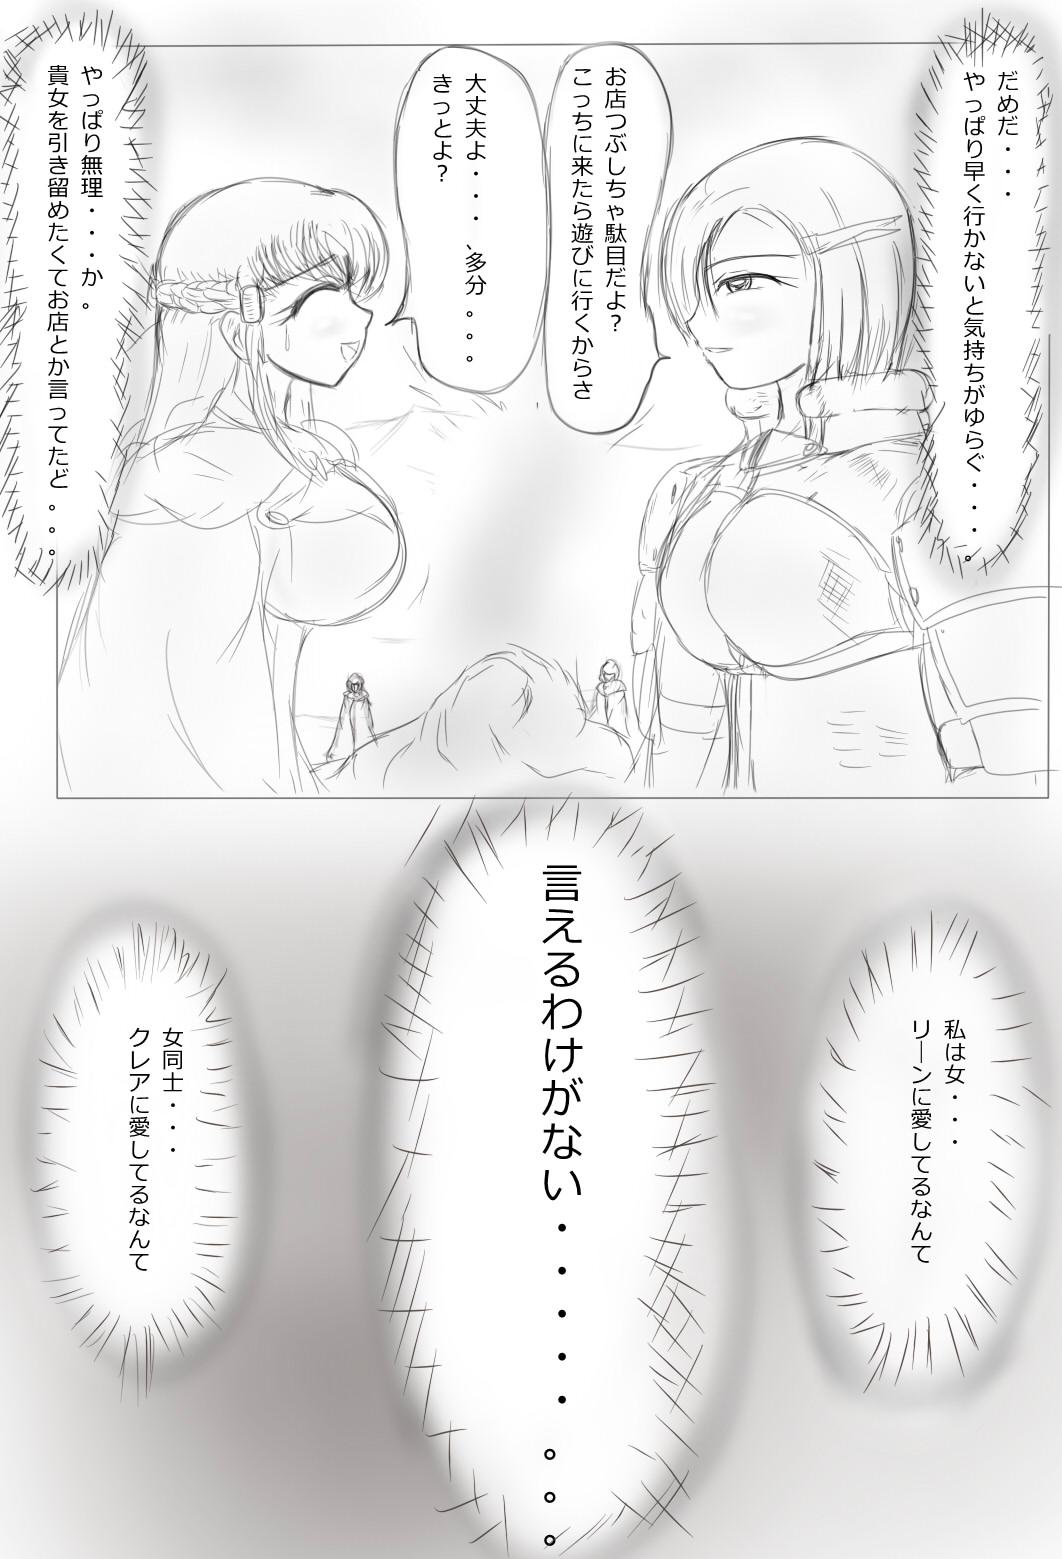 Brunettes [がんすきー] Claire to Rin ~Inma no Nie~ Ch. 1-2 Stretching - Picture 3